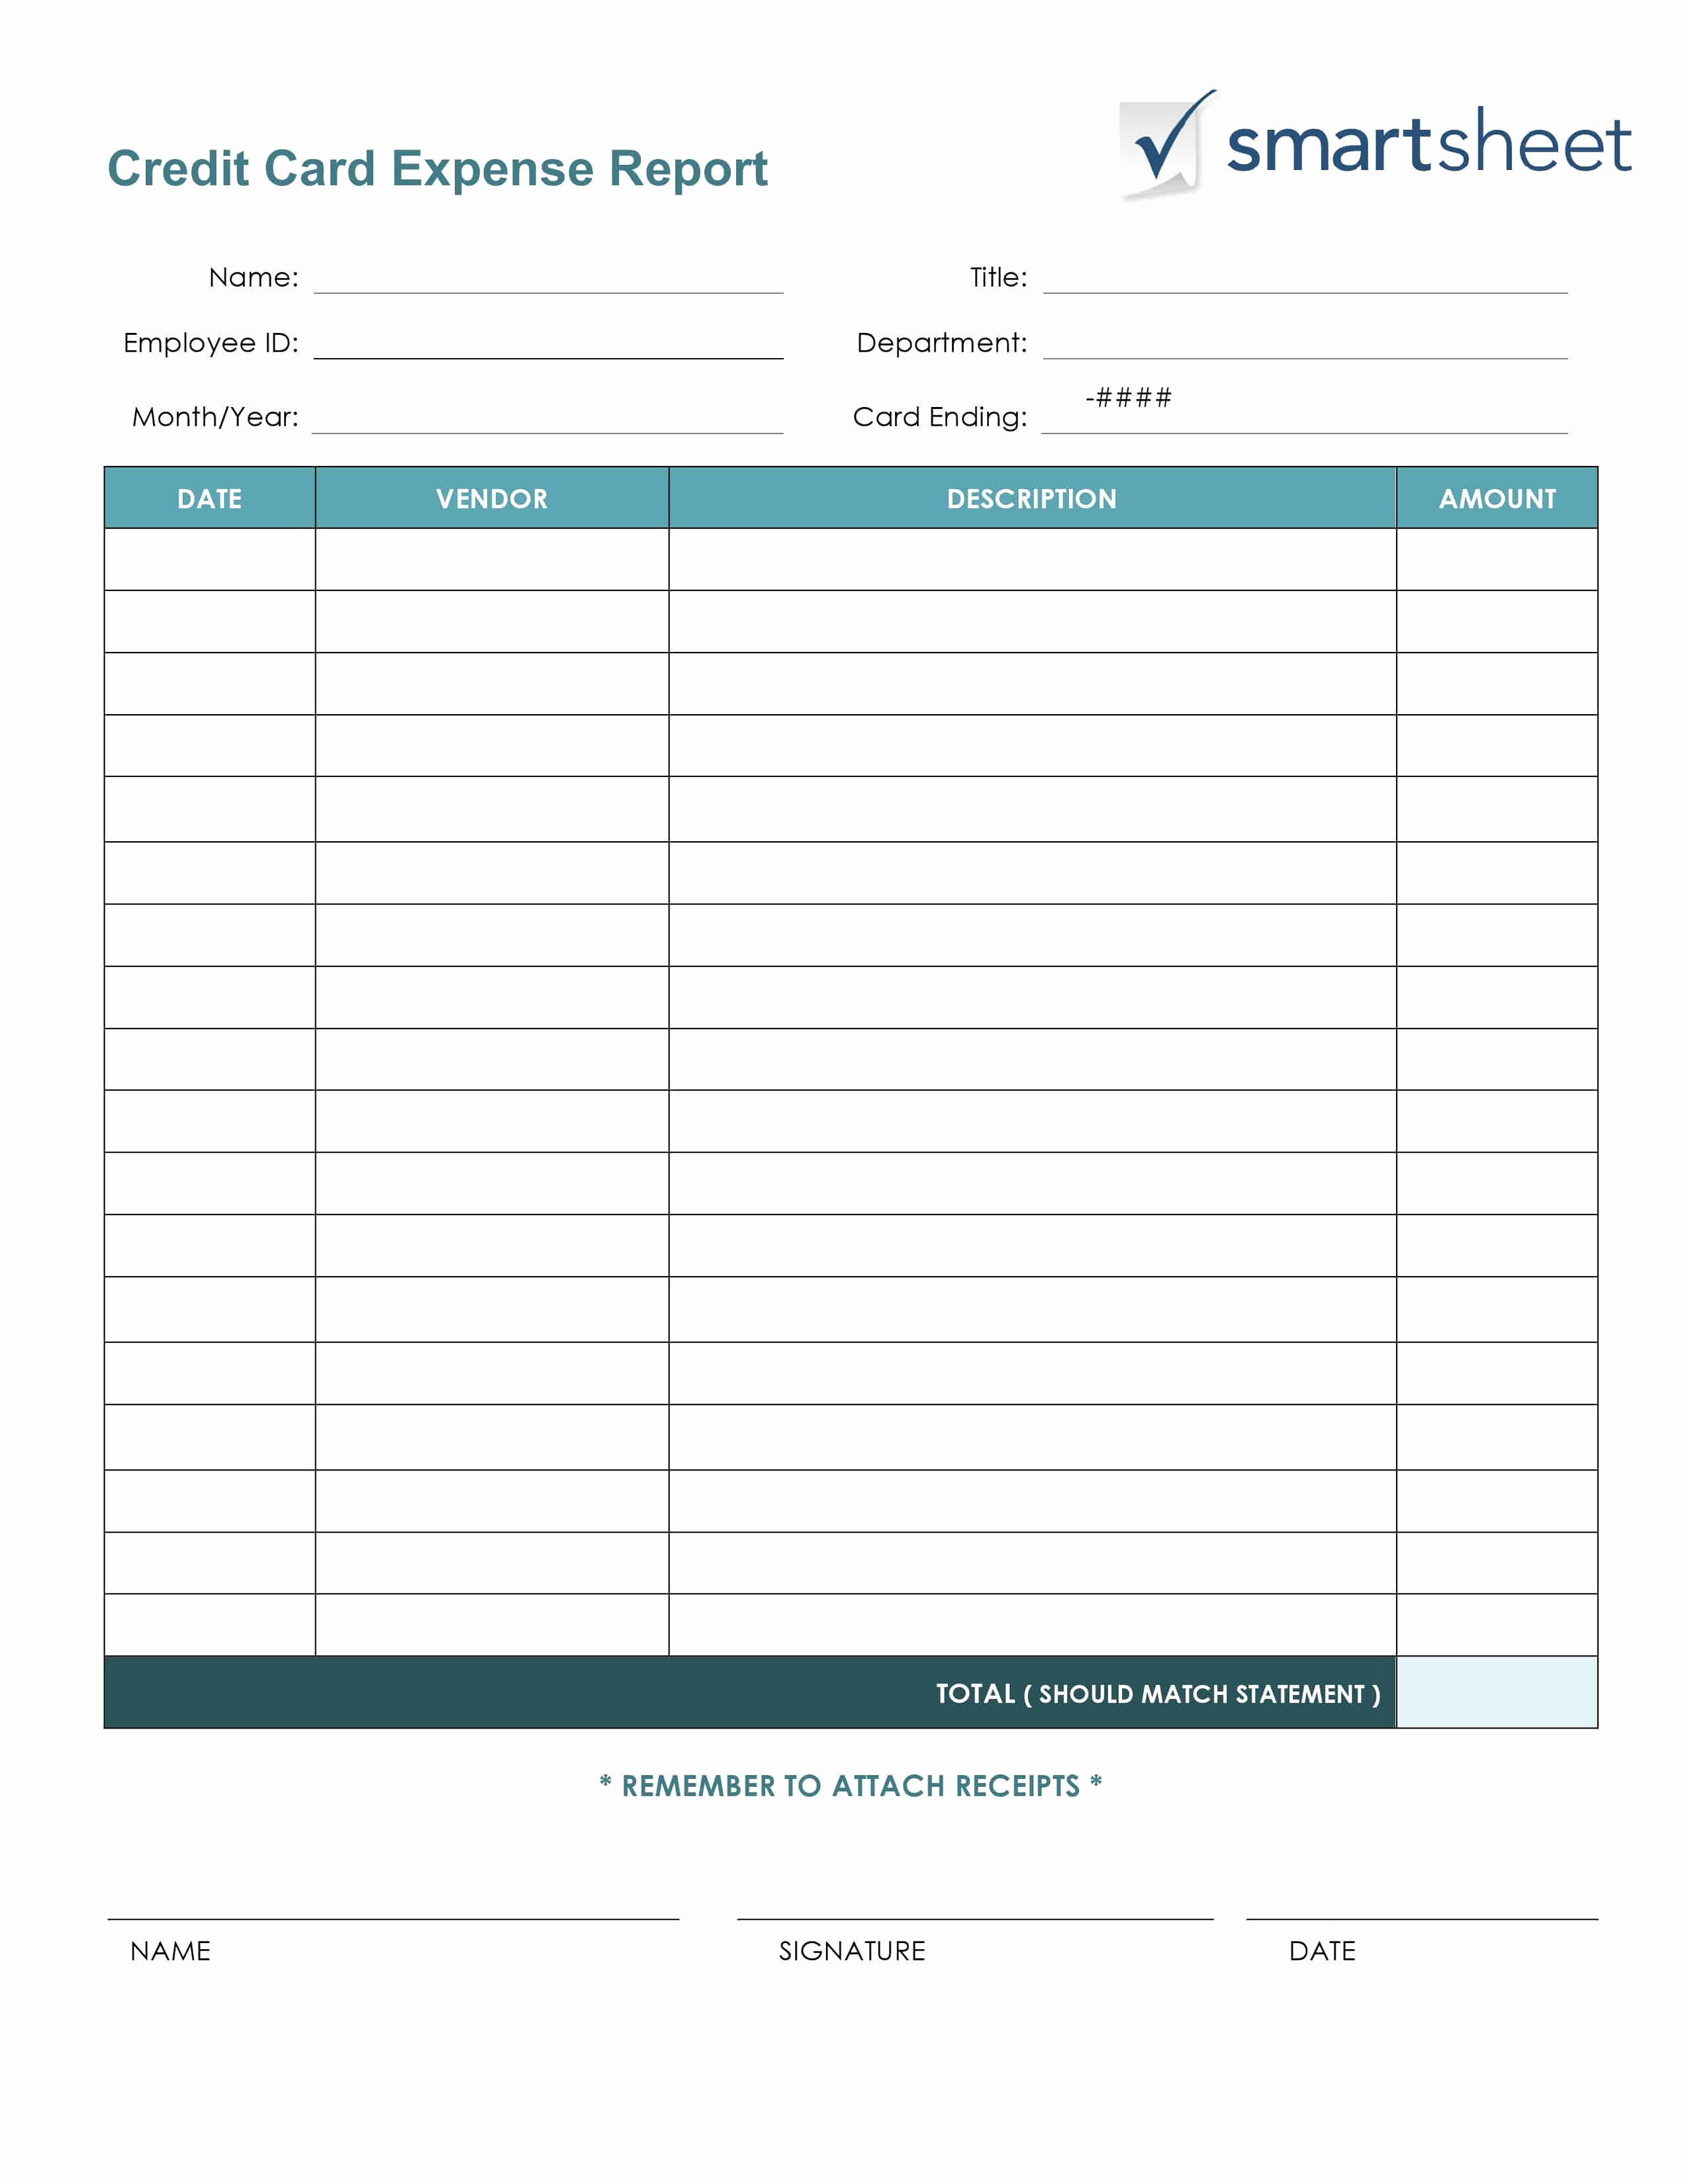 Monthly Expense Report Template Fresh Free Expense Report Templates Smartsheet